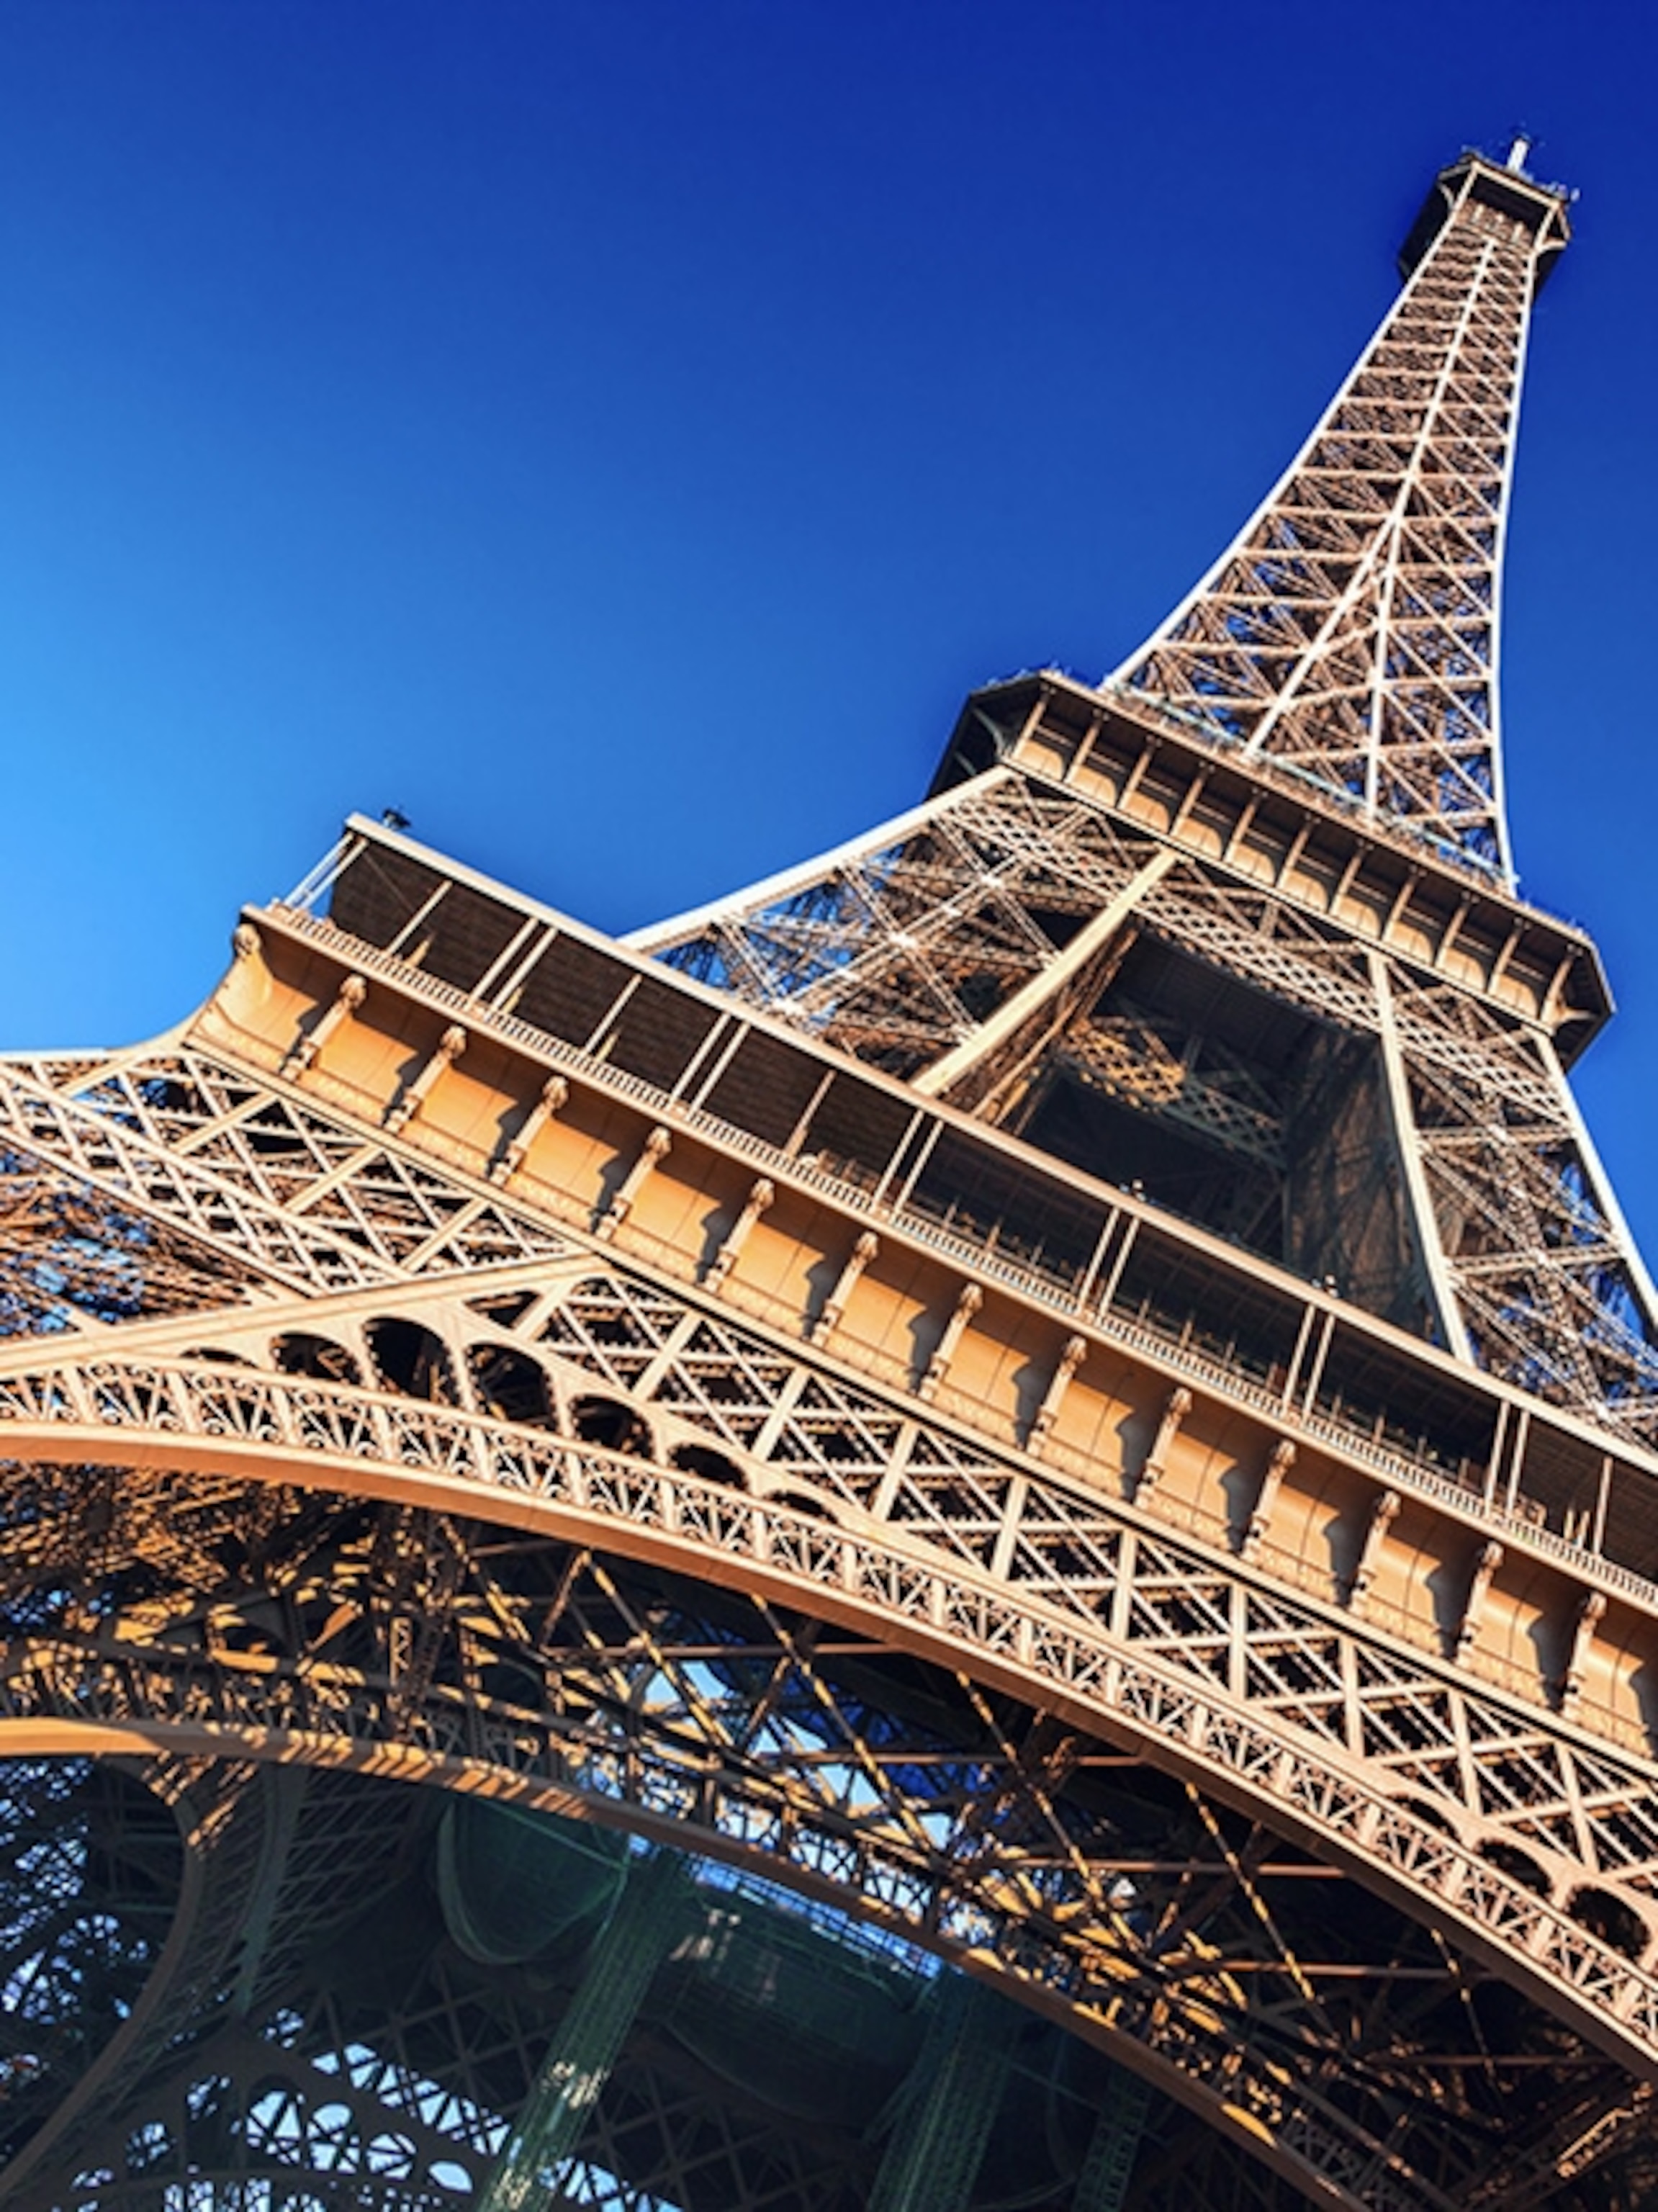 Detail Image Of The Eiffel Tower Nomer 14